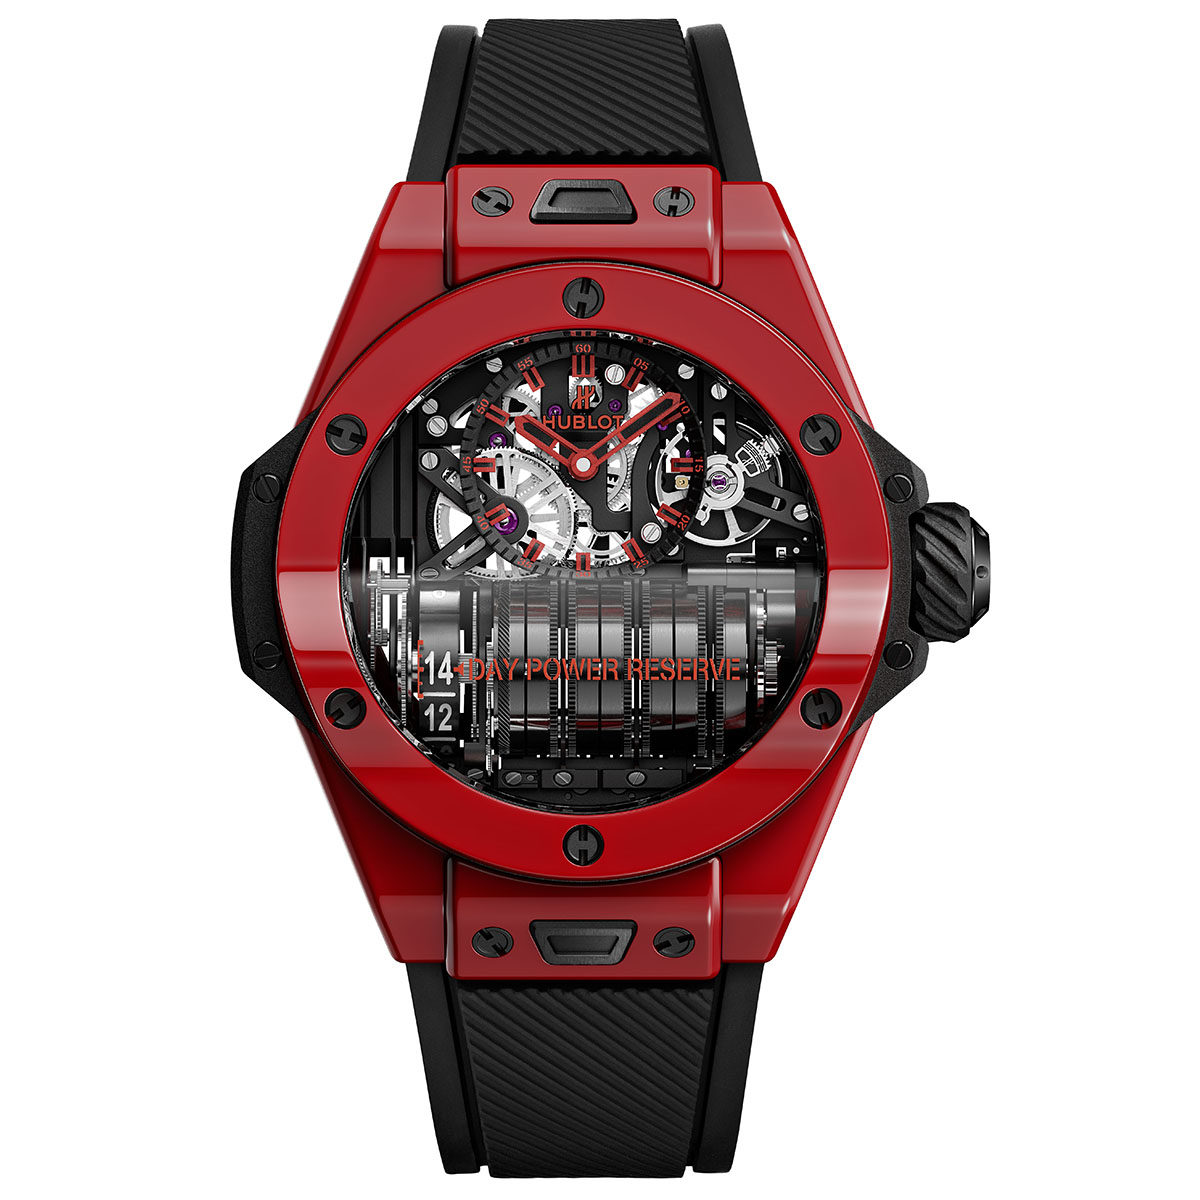 BIG BANG <br>MP-11 POWER RESERVE 14 DAYS <br>RED MAGIC